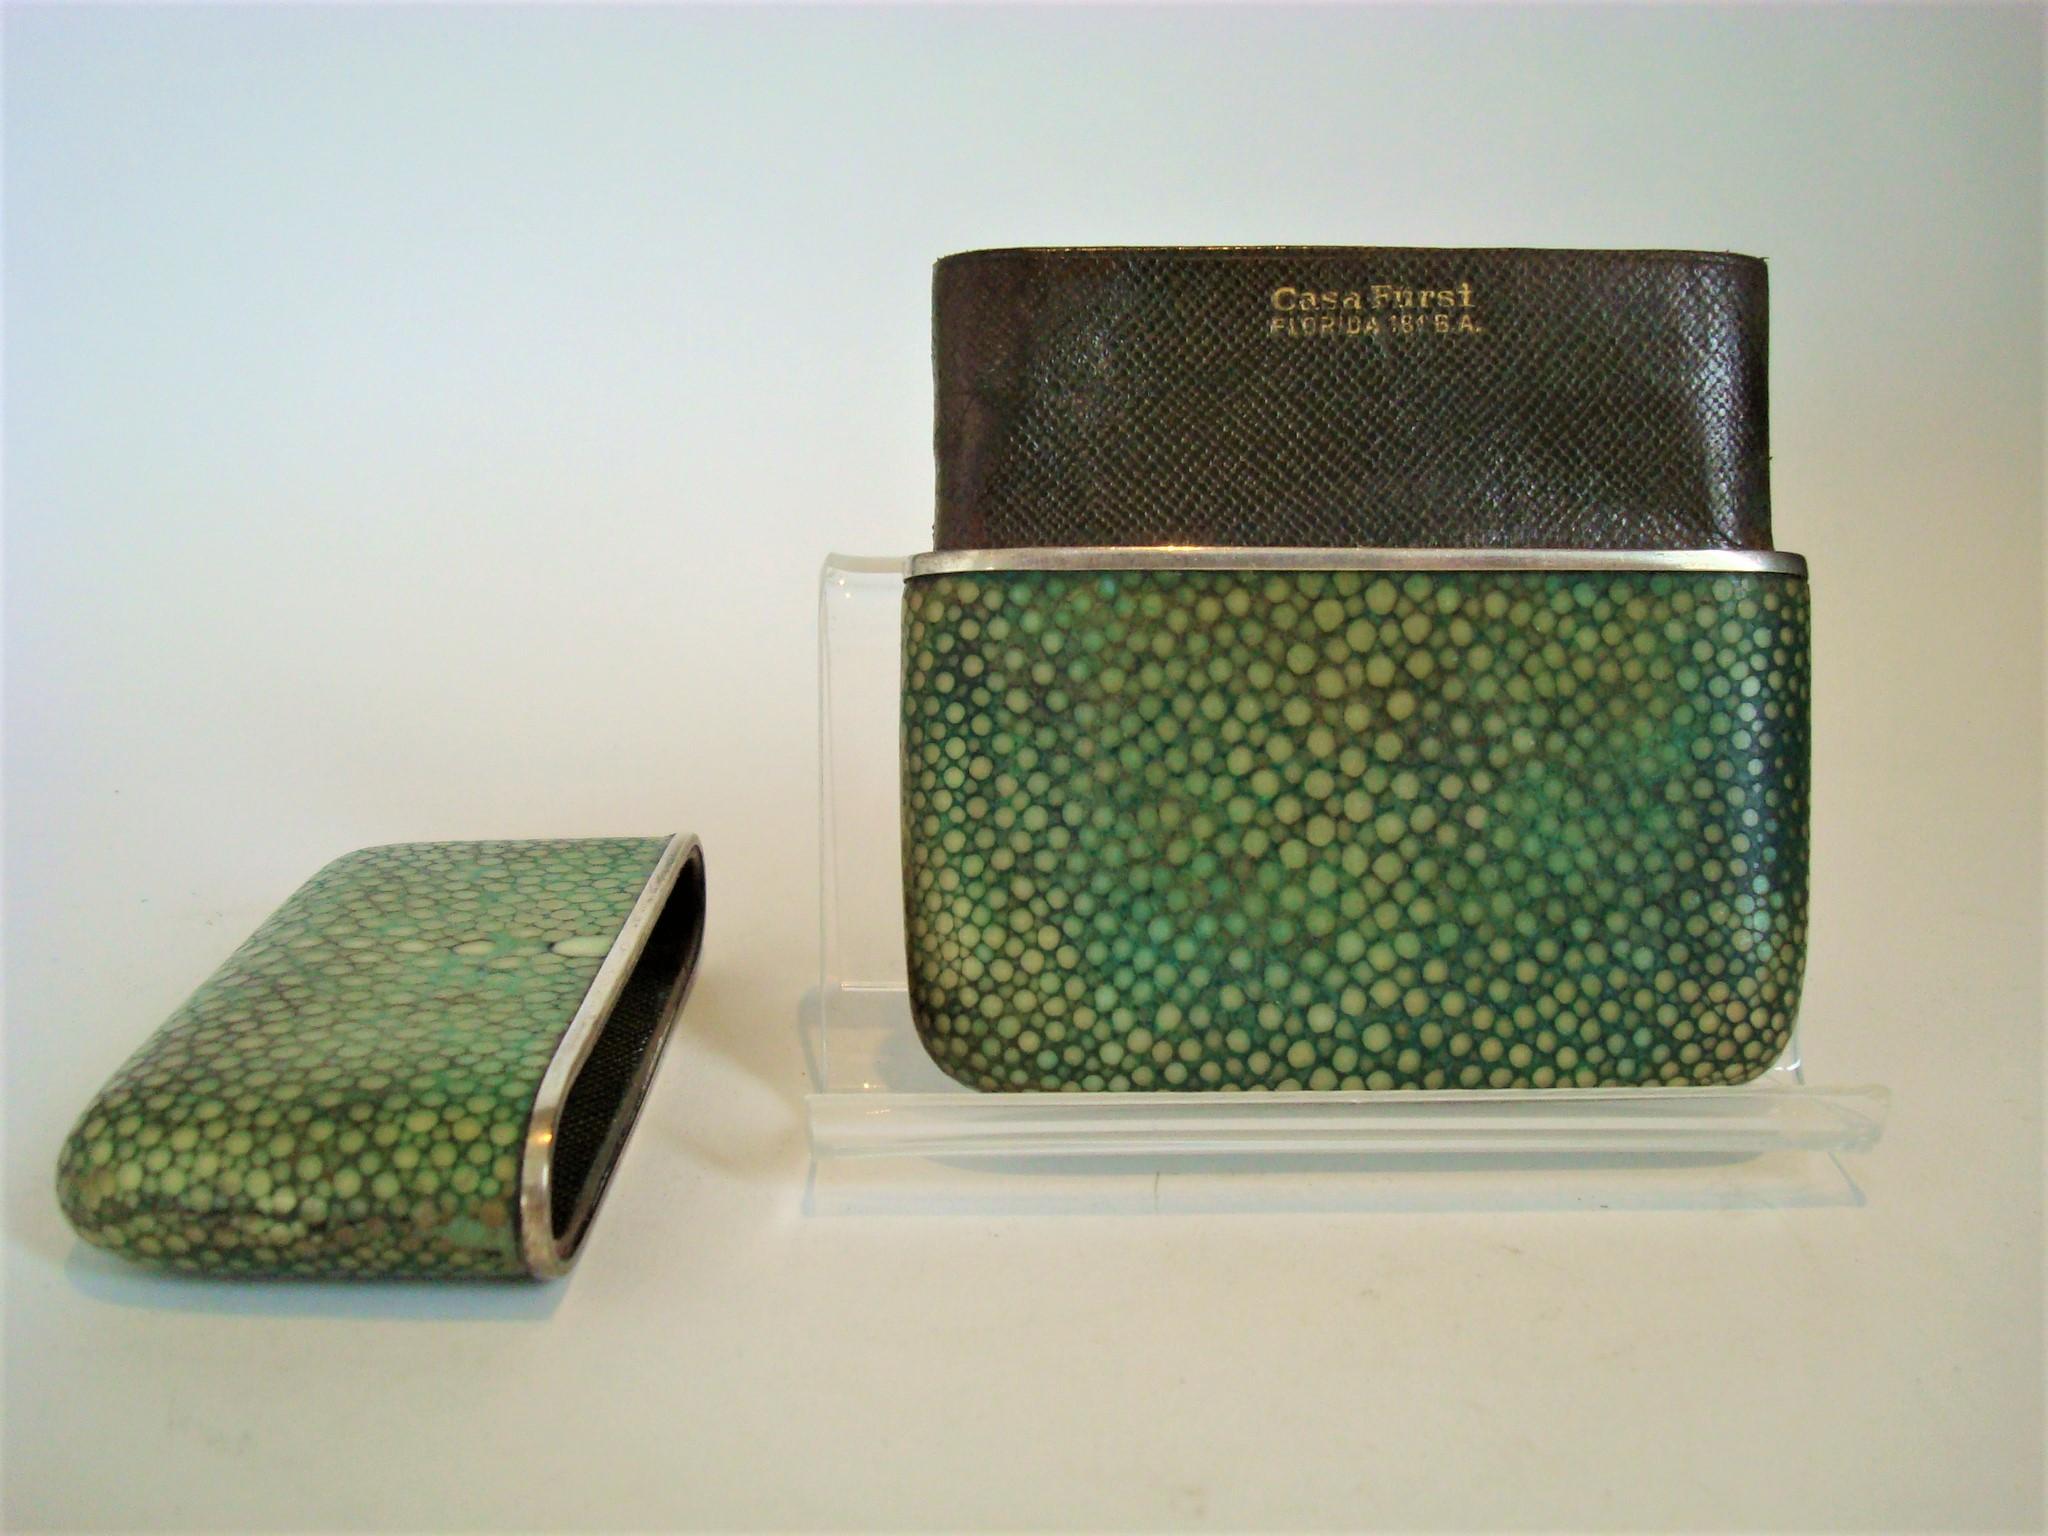 Exquisite shagreen cigar case with silver collar. Expands for differing lengths of small cigar or cigarettes.
Made in the U.K. in the 1900-1920´s. It has the stamp of the retail shop in Buenos Aires.